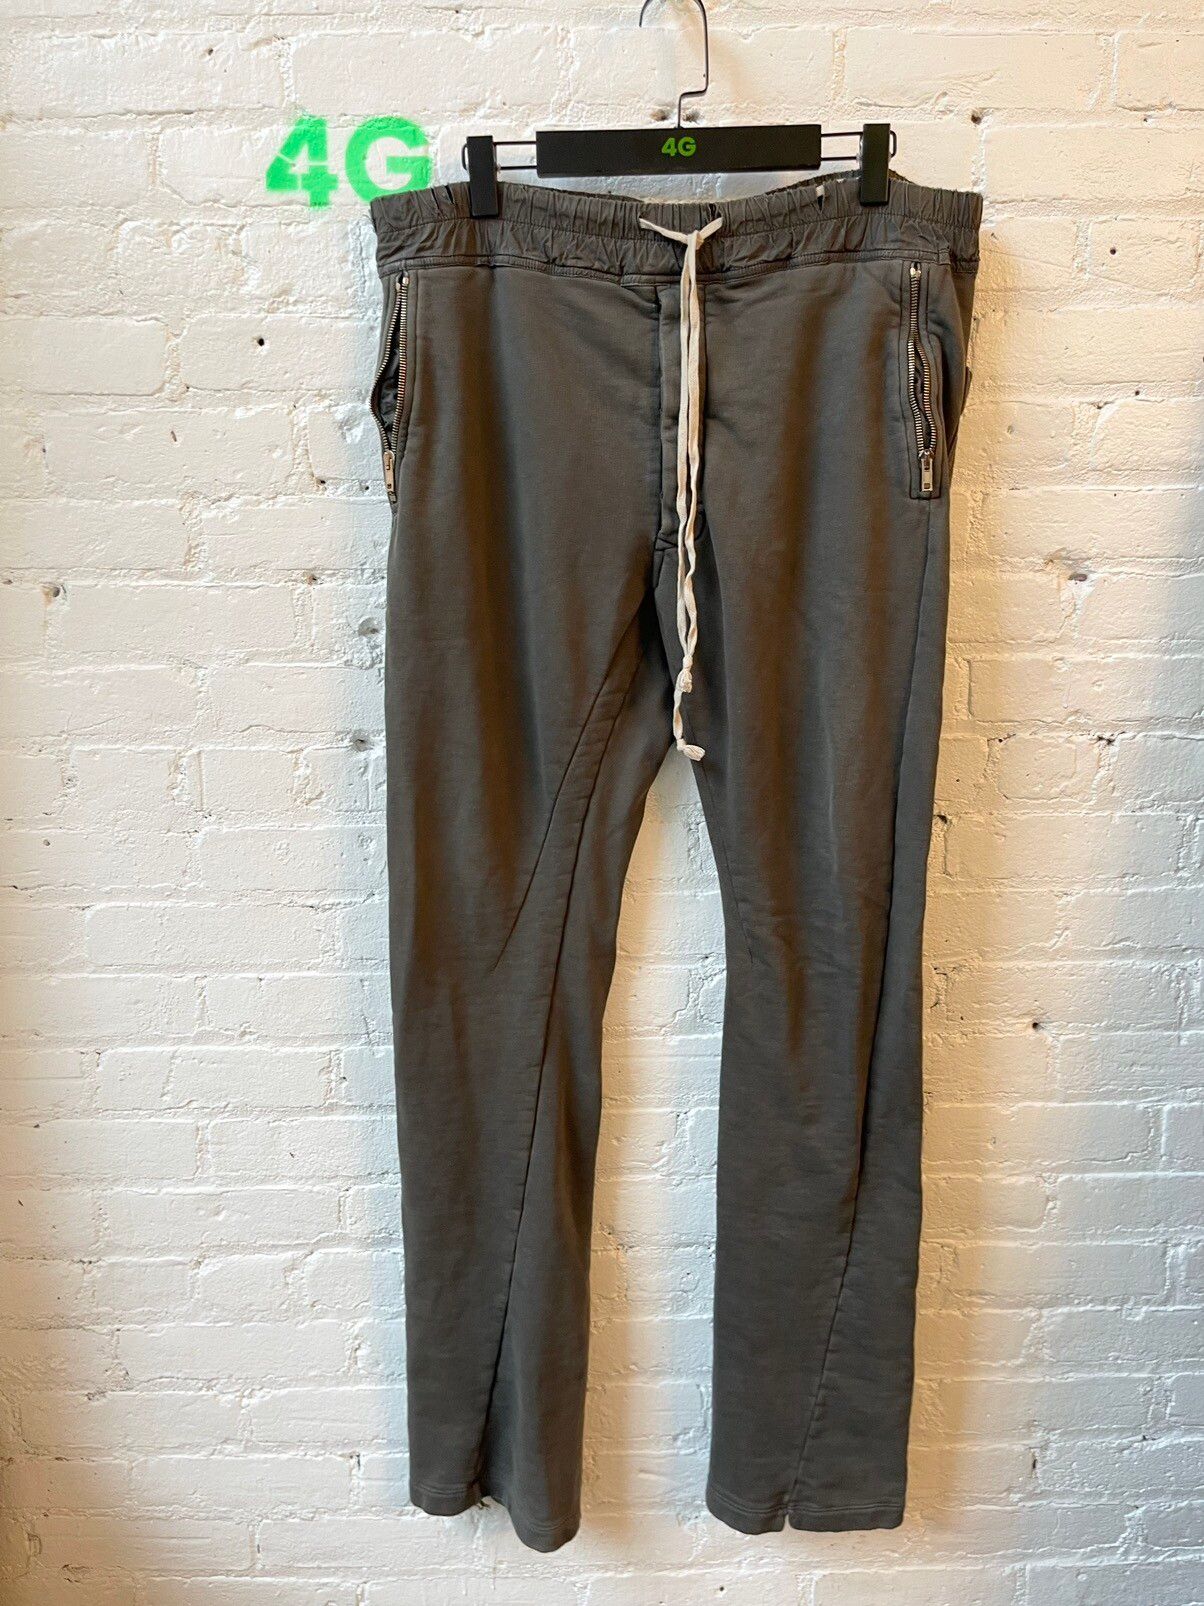 Pre-owned Rick Owens Thrashed Berlin Sweatpants Pants No Drop Crotch In Washed Black